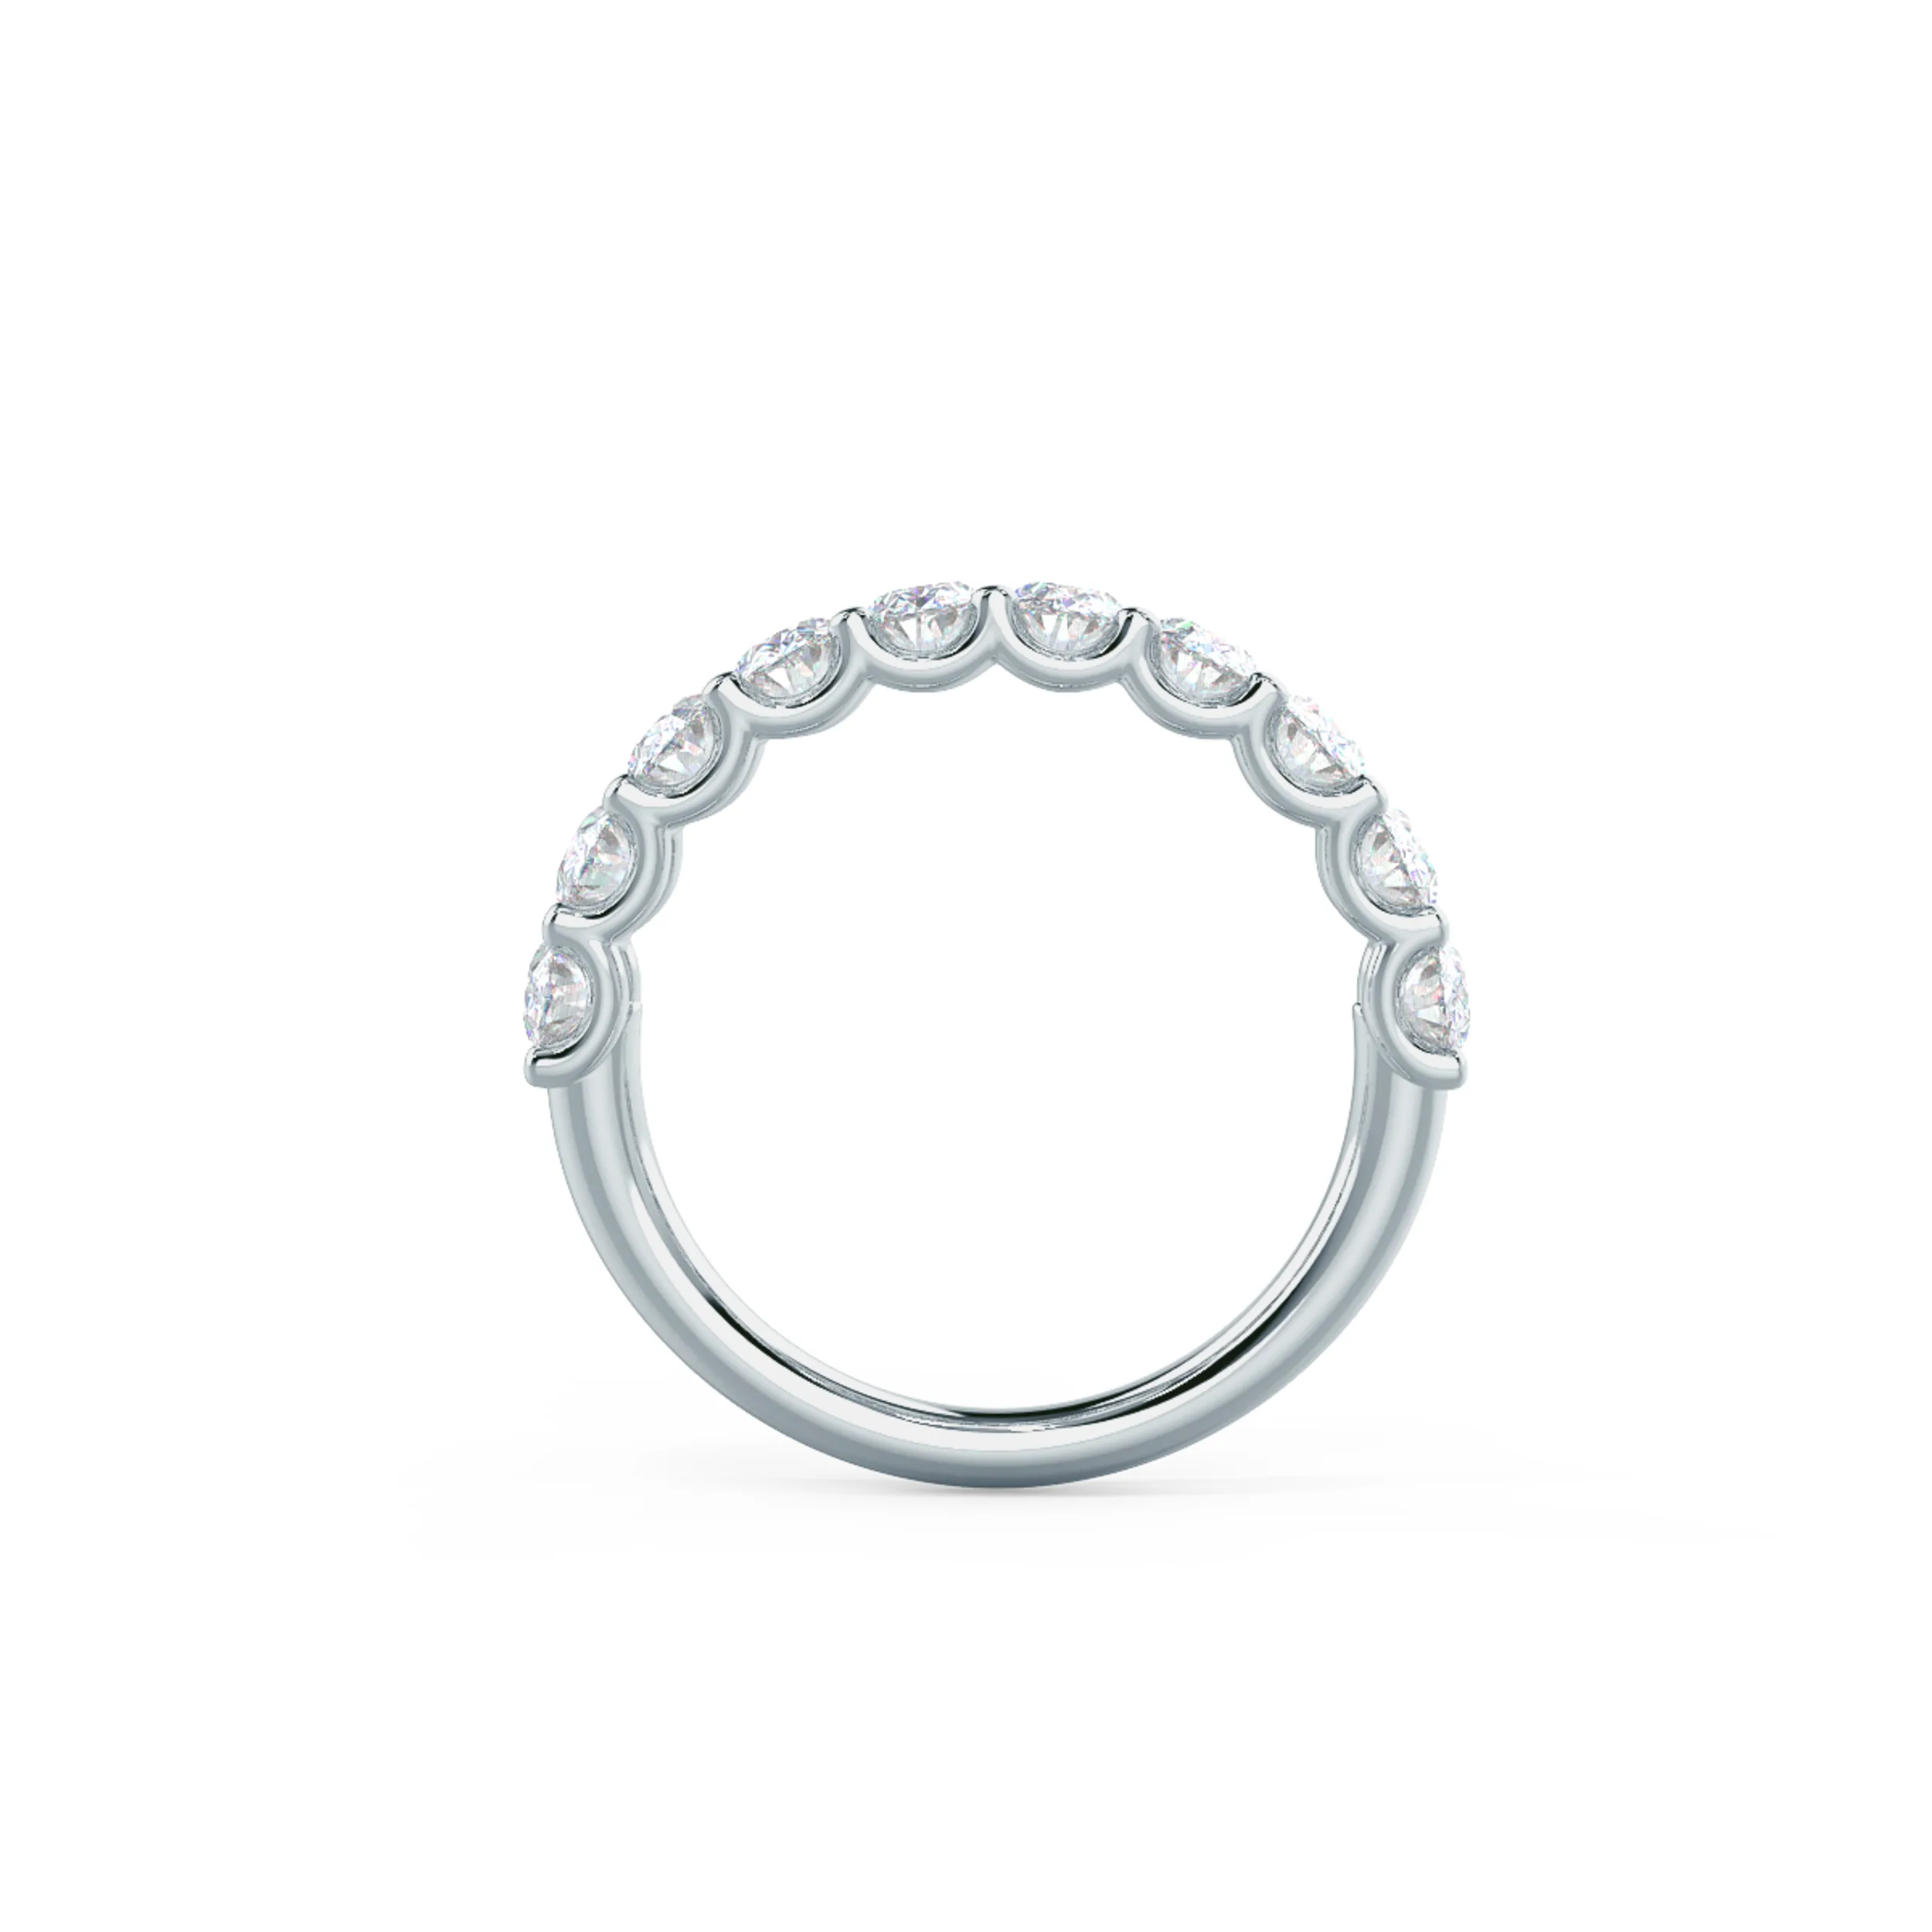 High Quality 2.0 Carat Diamonds set in 18k White Gold Oval French U Half Band (Profile View)